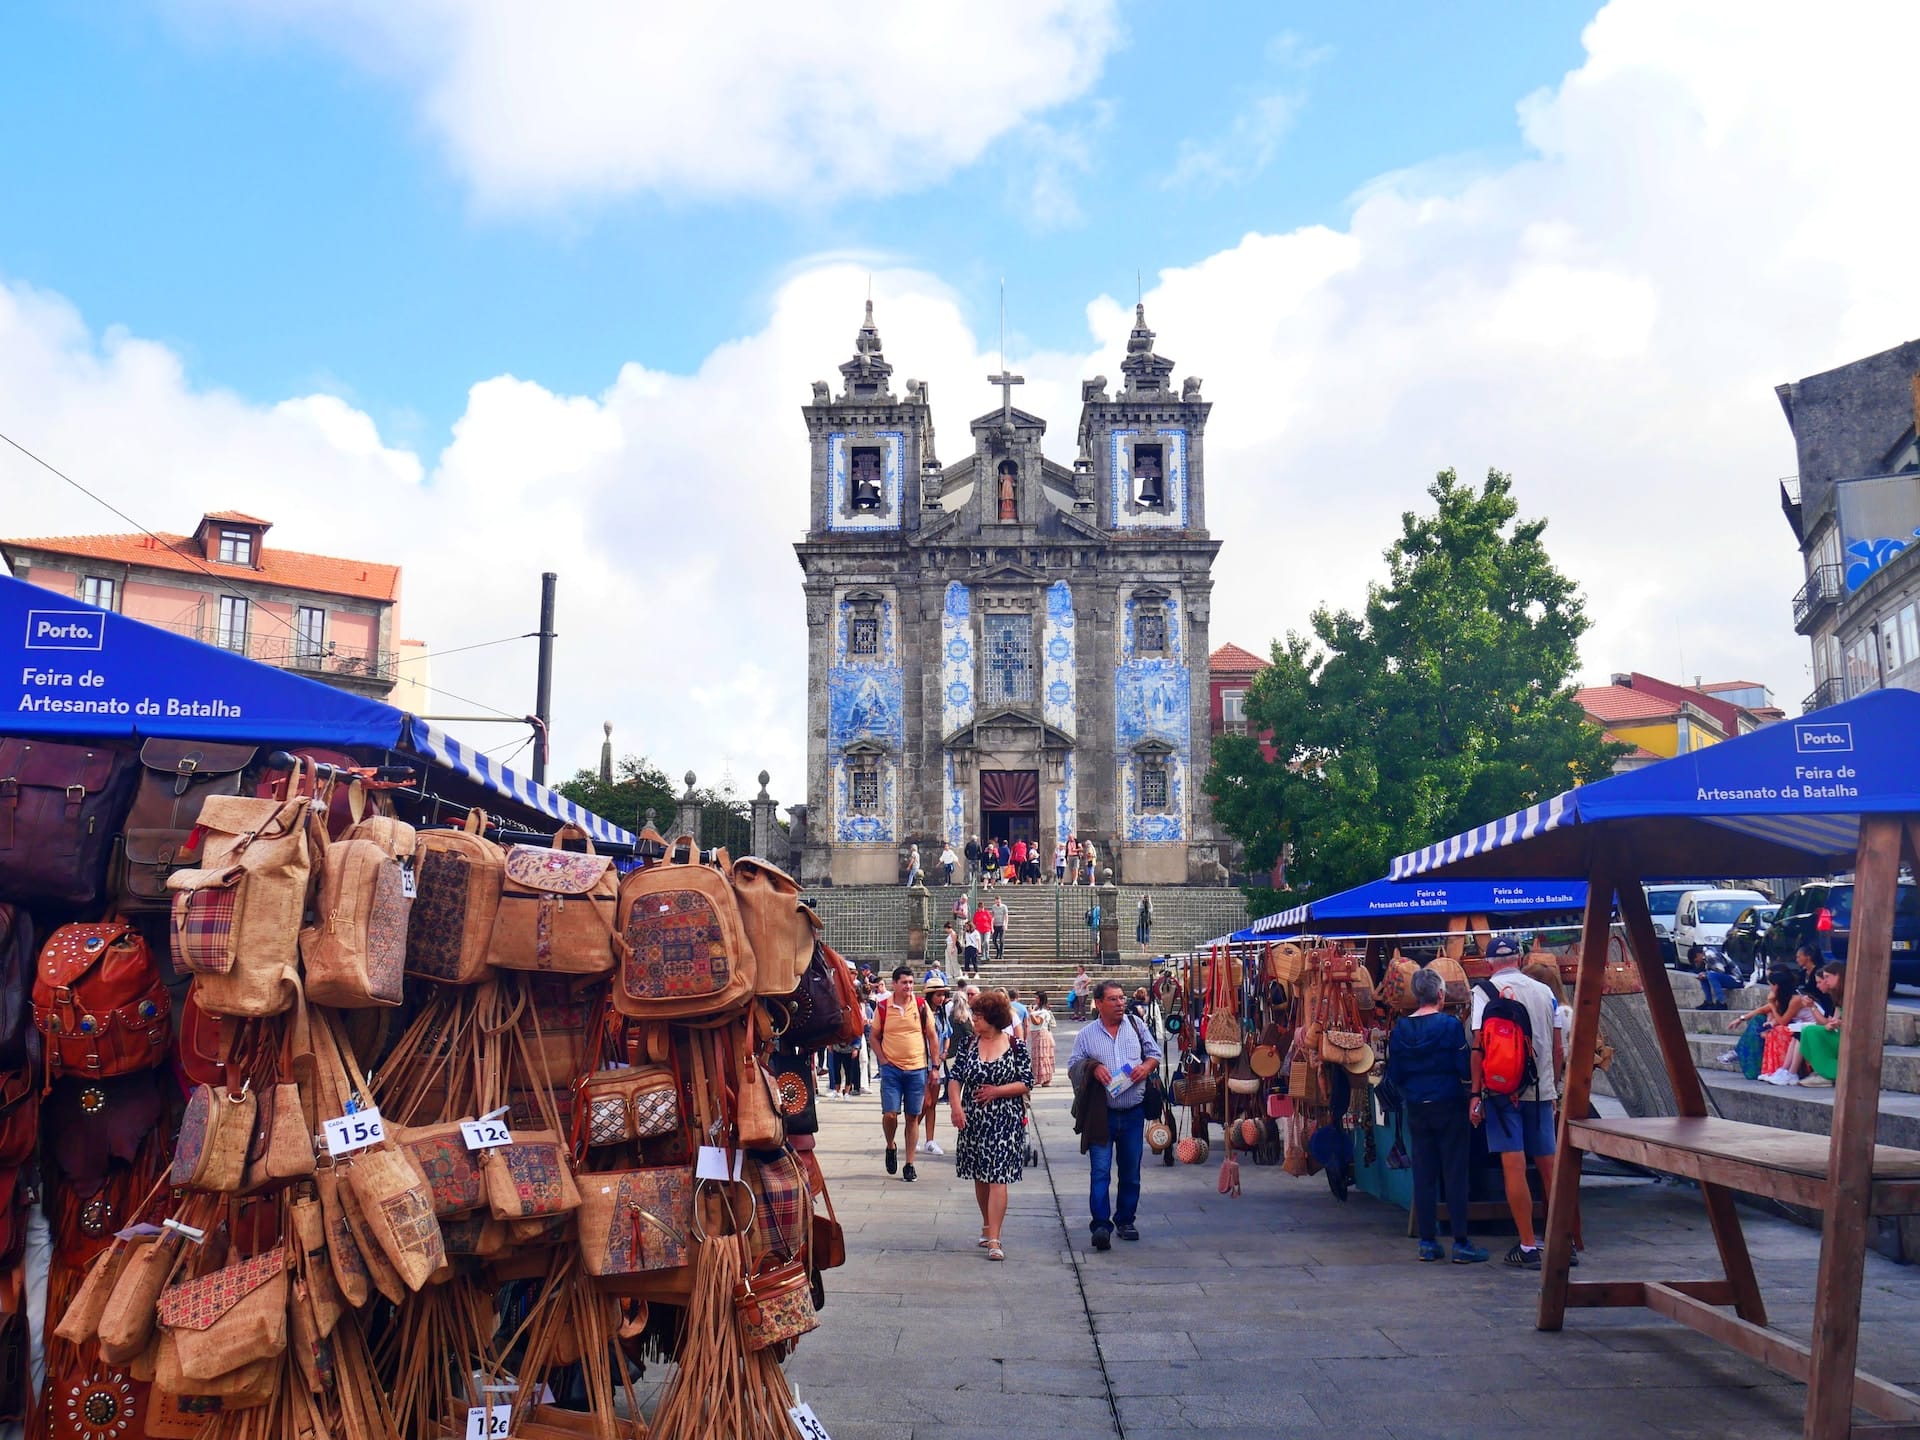 Santo Ildefonso is a culturally significant and well-connected neighborhood in Porto. Visitors can explore its rich history, art scene, varied gastronomy, and nightlife